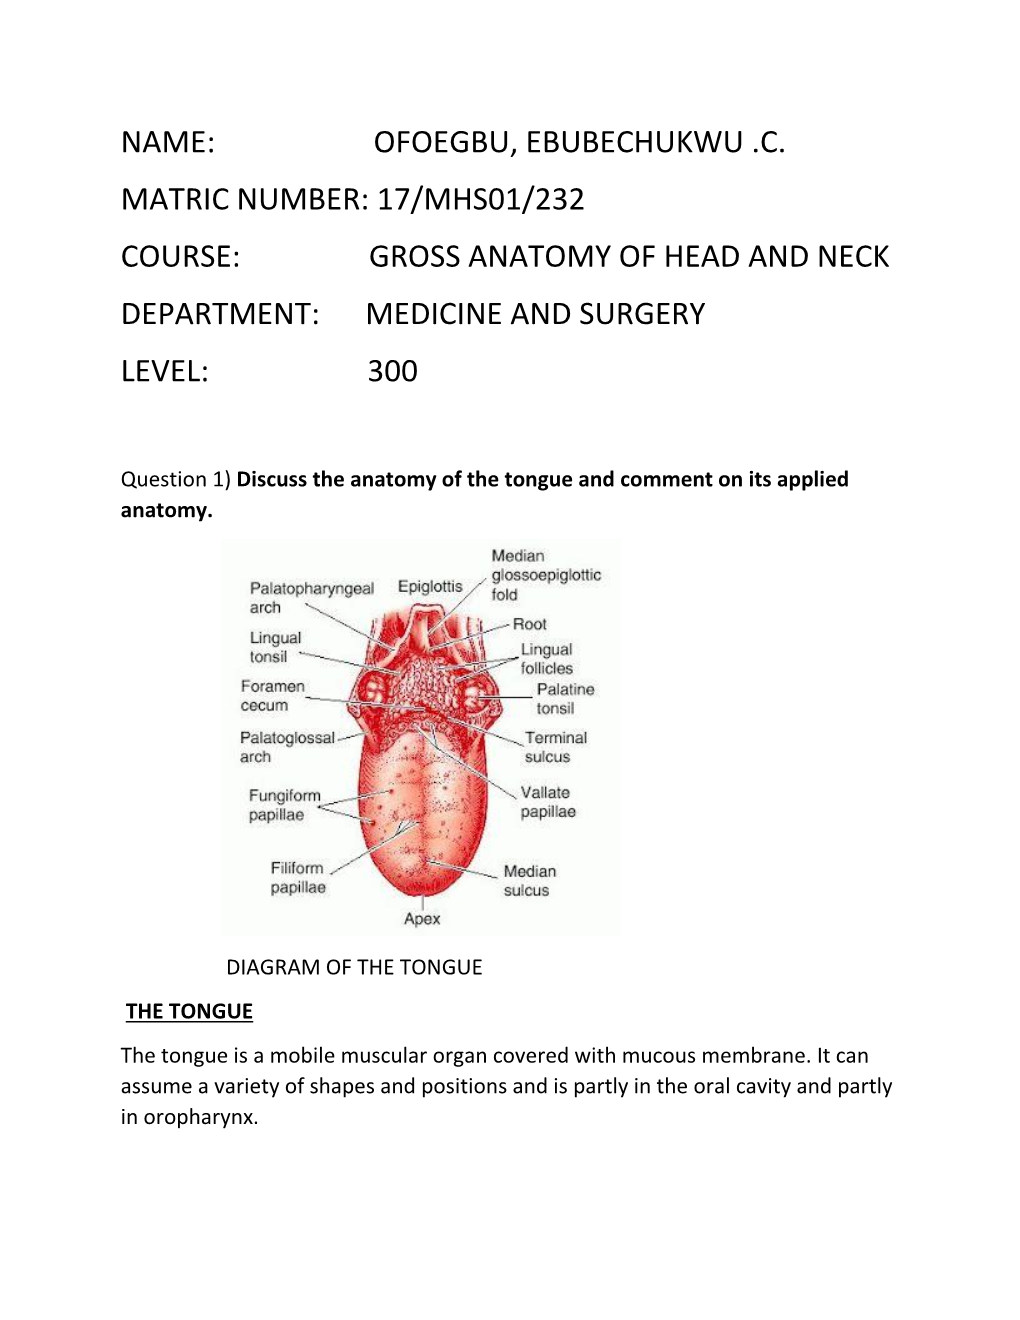 Gross Anatomy of Head and Neck Department